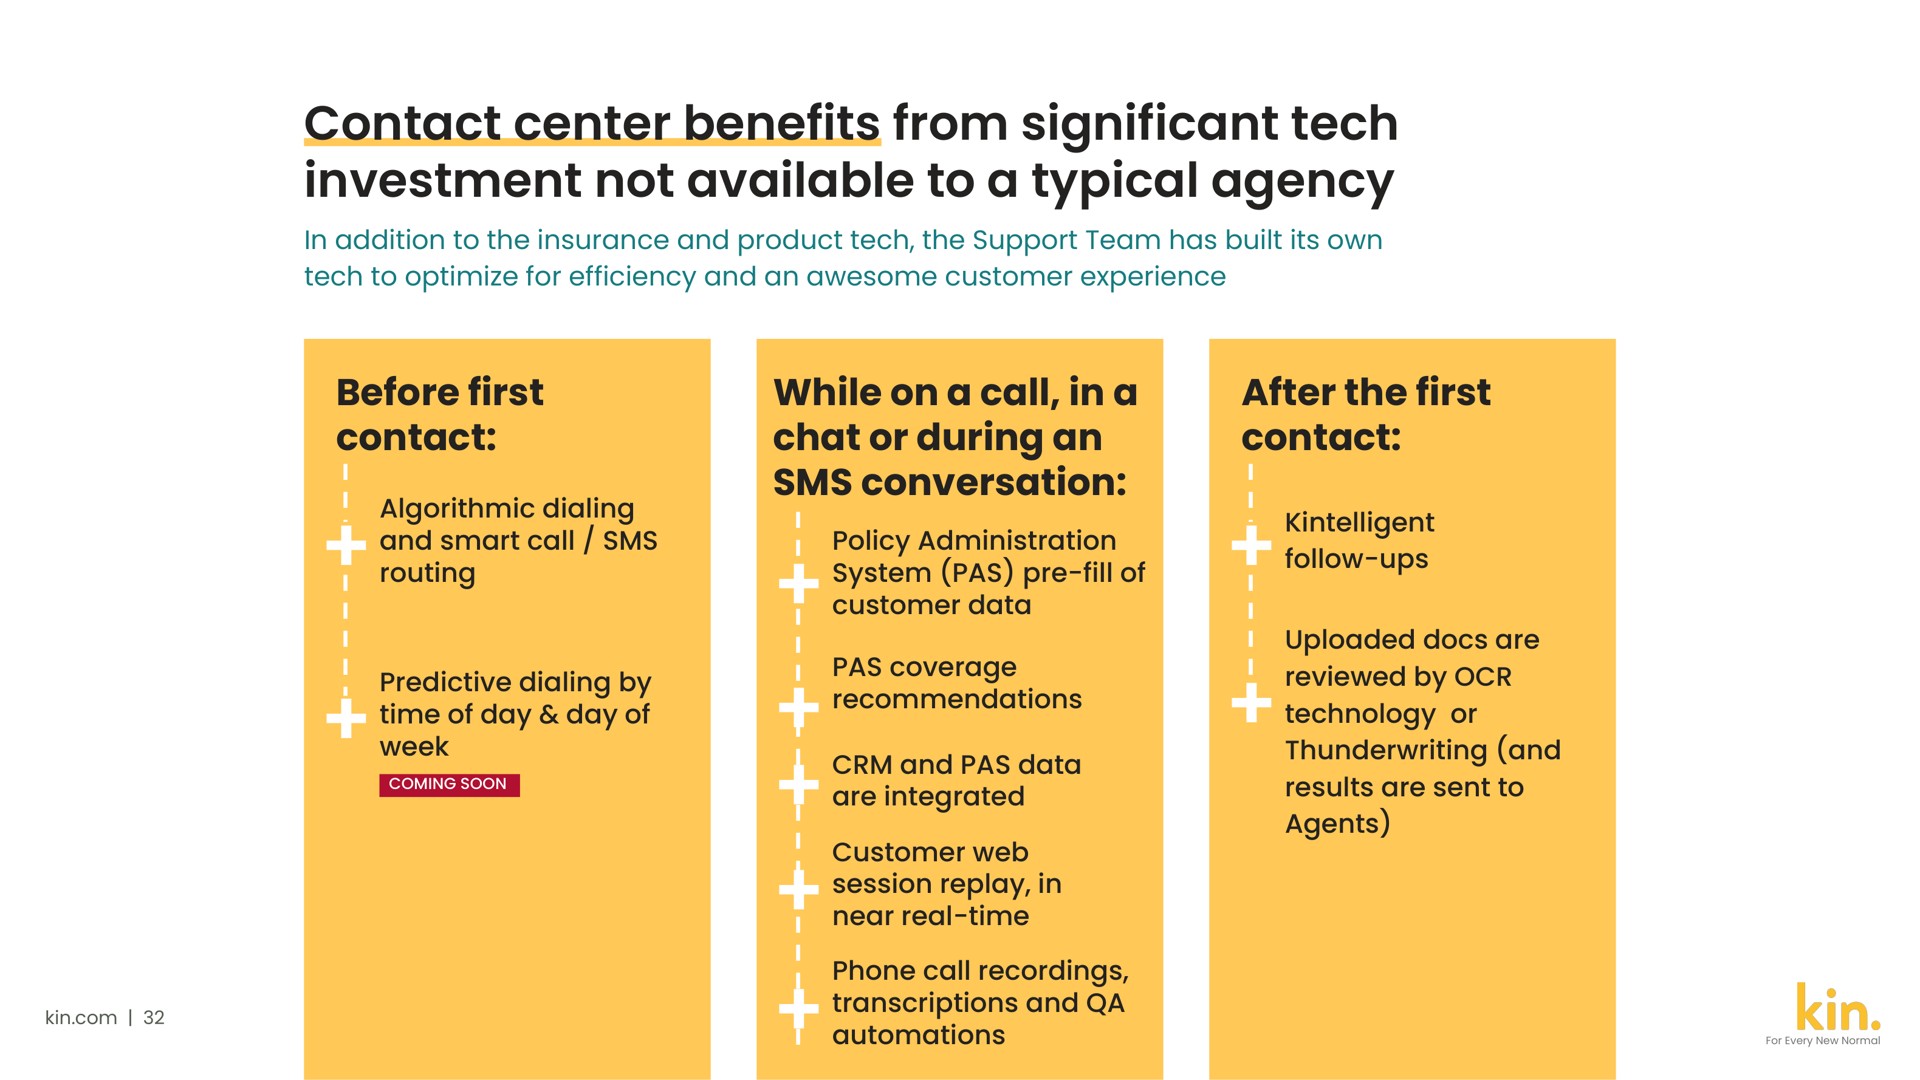 contact center benefits from significant tech investment not available to a typical agency | Kin